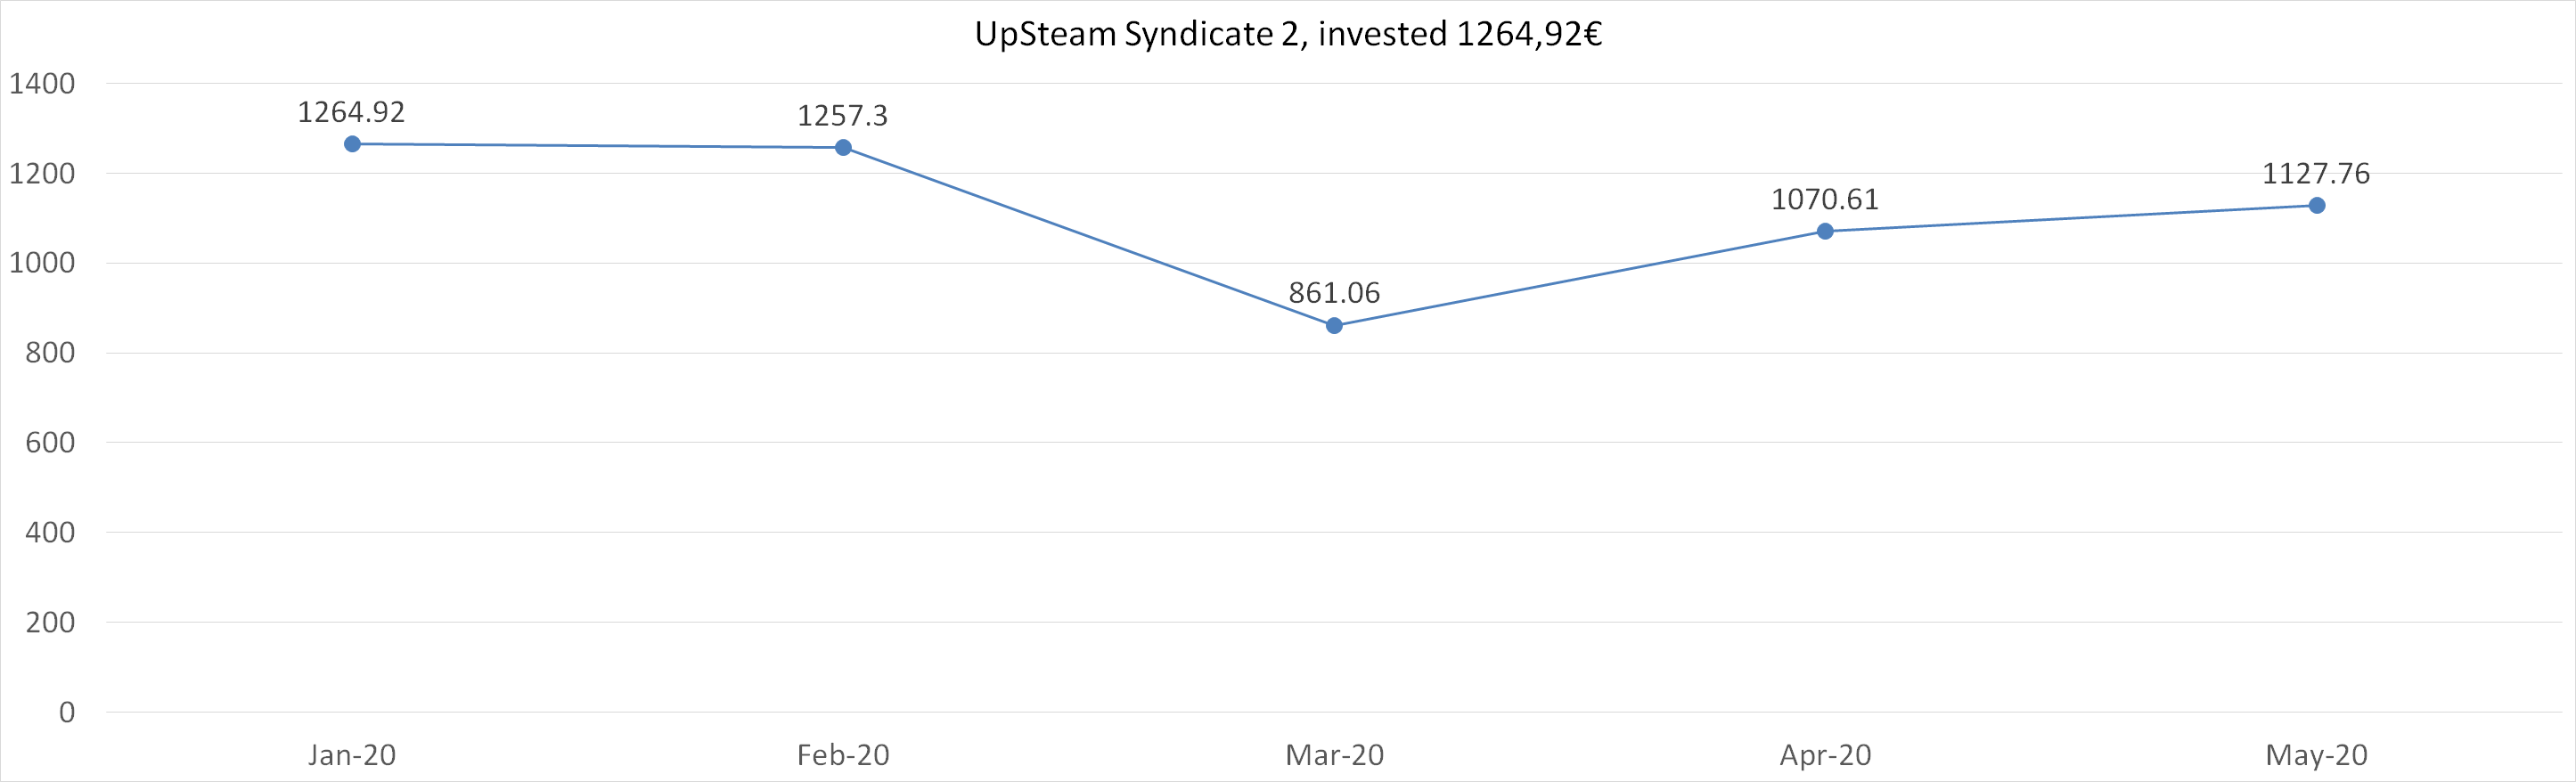 Upsteam syndicate 2, invested 1264,92 euros, may 2020